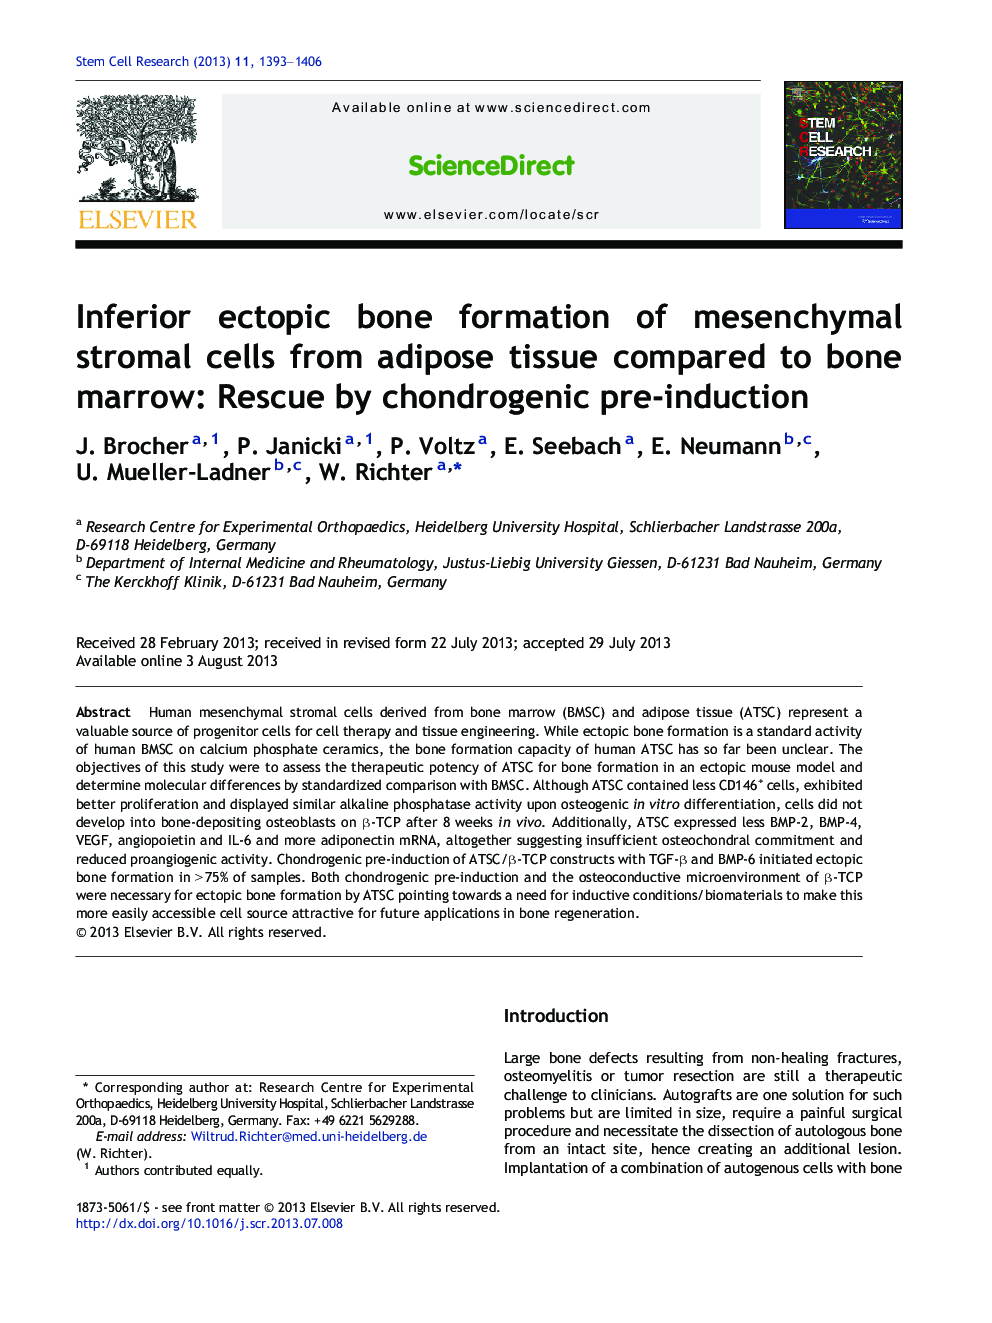 Inferior ectopic bone formation of mesenchymal stromal cells from adipose tissue compared to bone marrow: Rescue by chondrogenic pre-induction